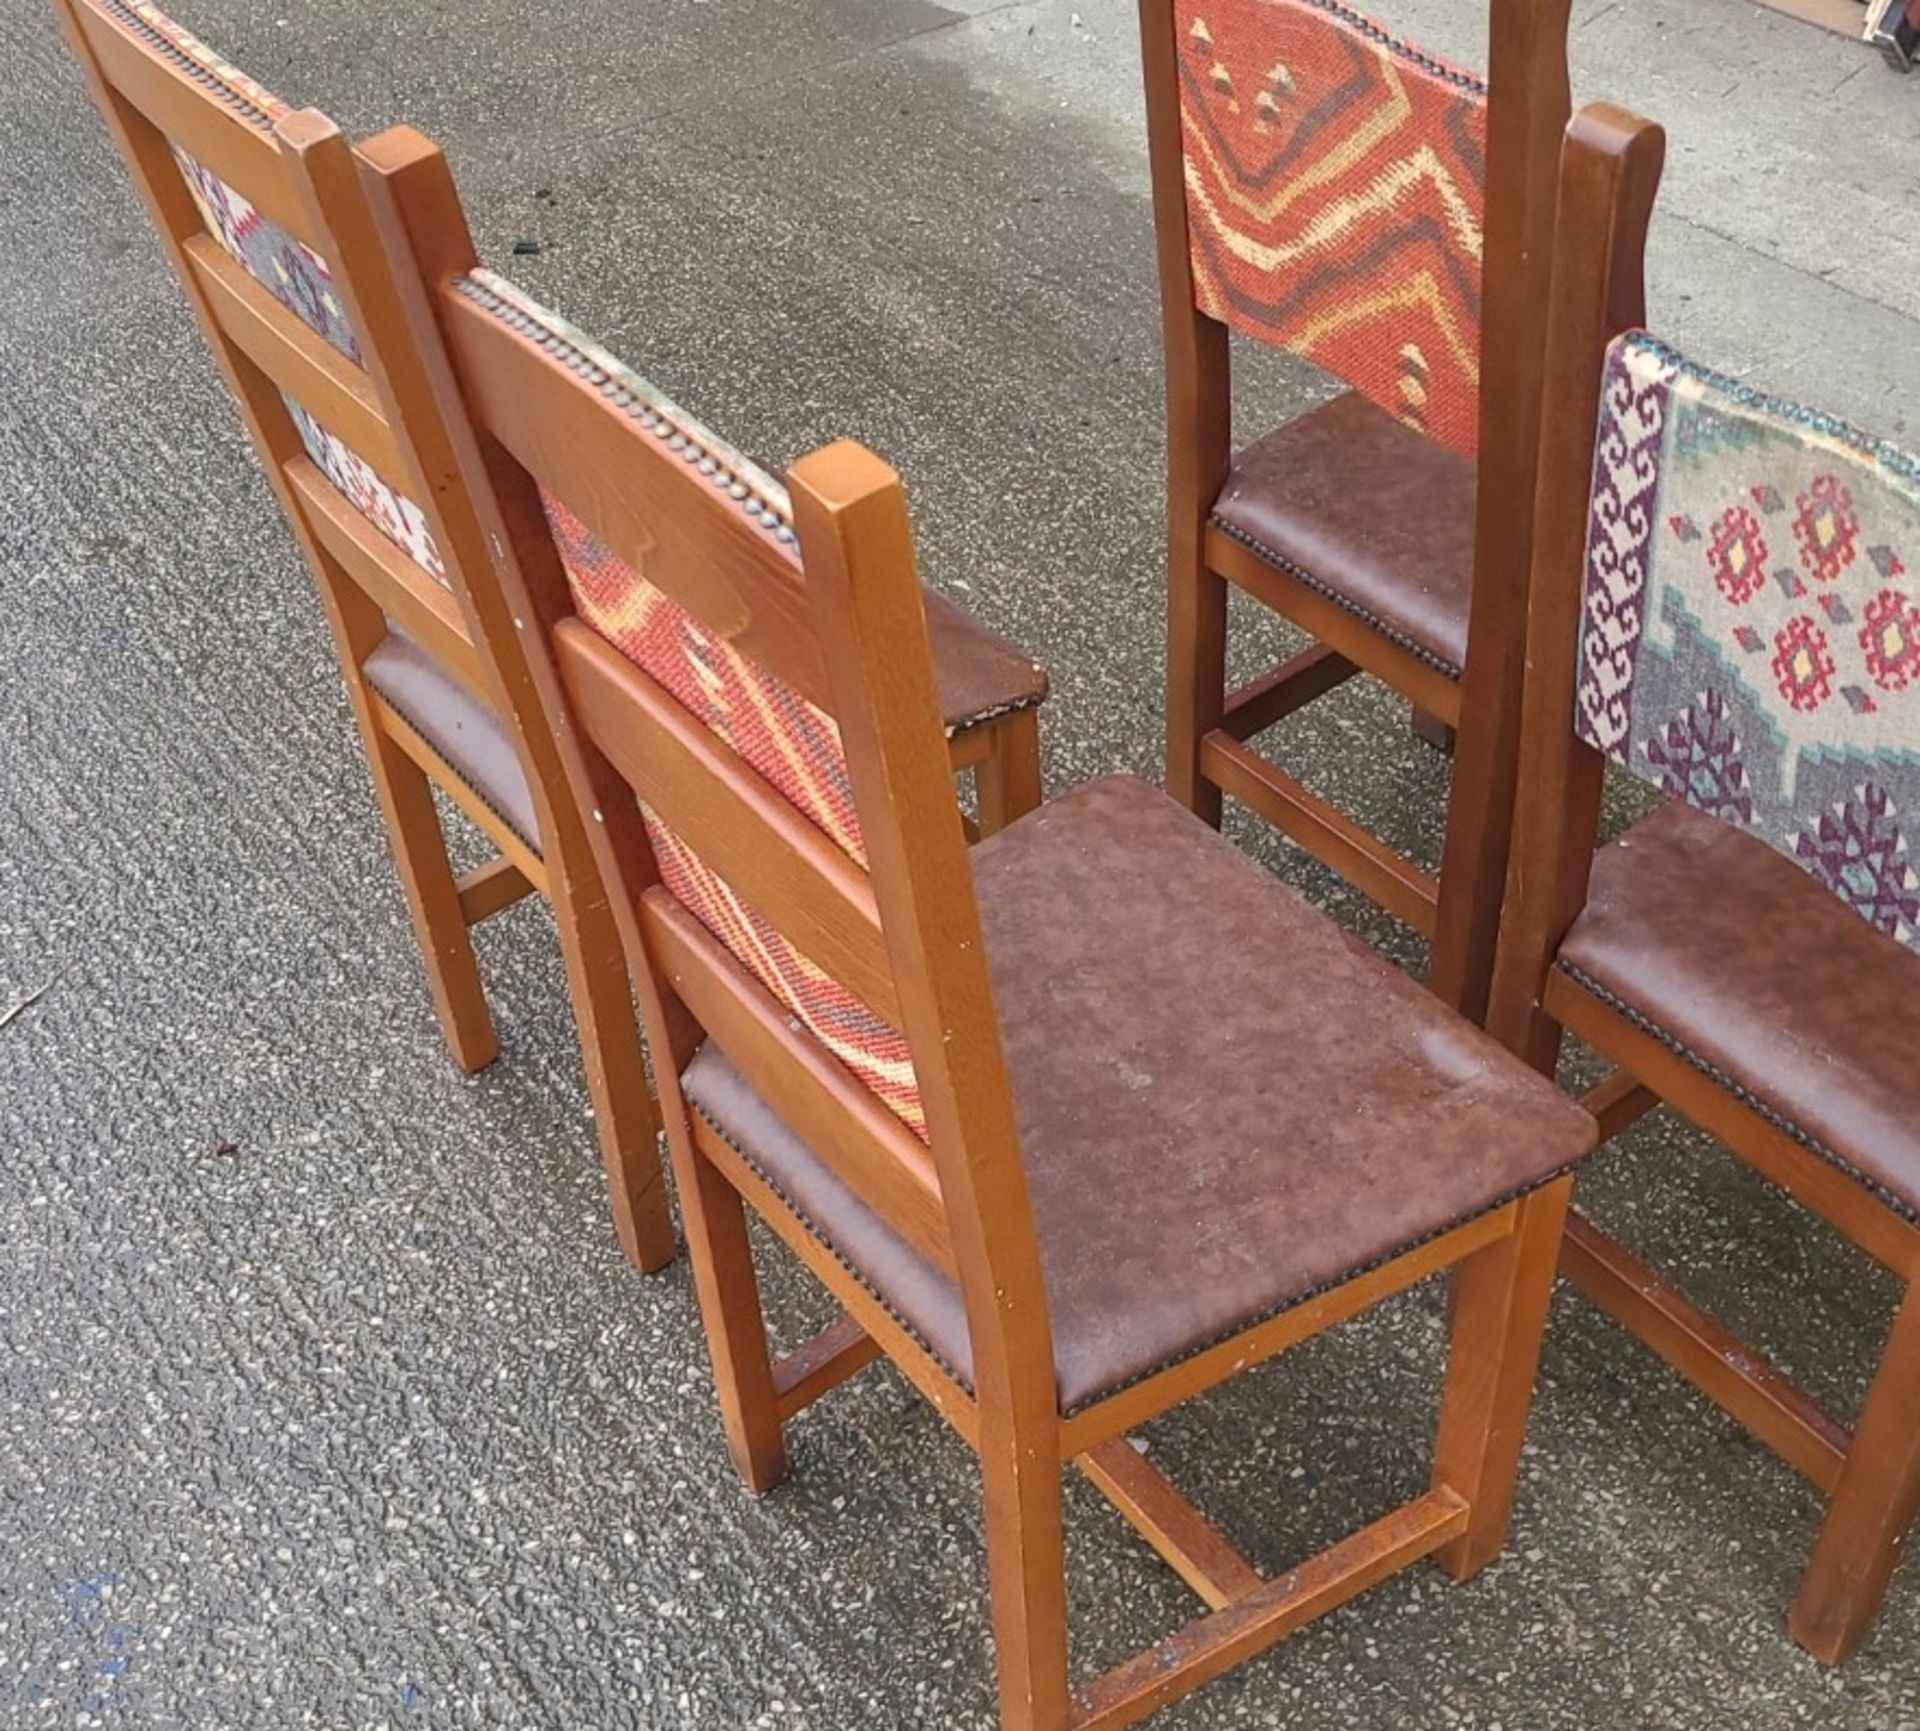 Set Of 5 x Aztec Print Dining Chairs With Faux Brown Leather Seating & Studded Seams - Image 2 of 5